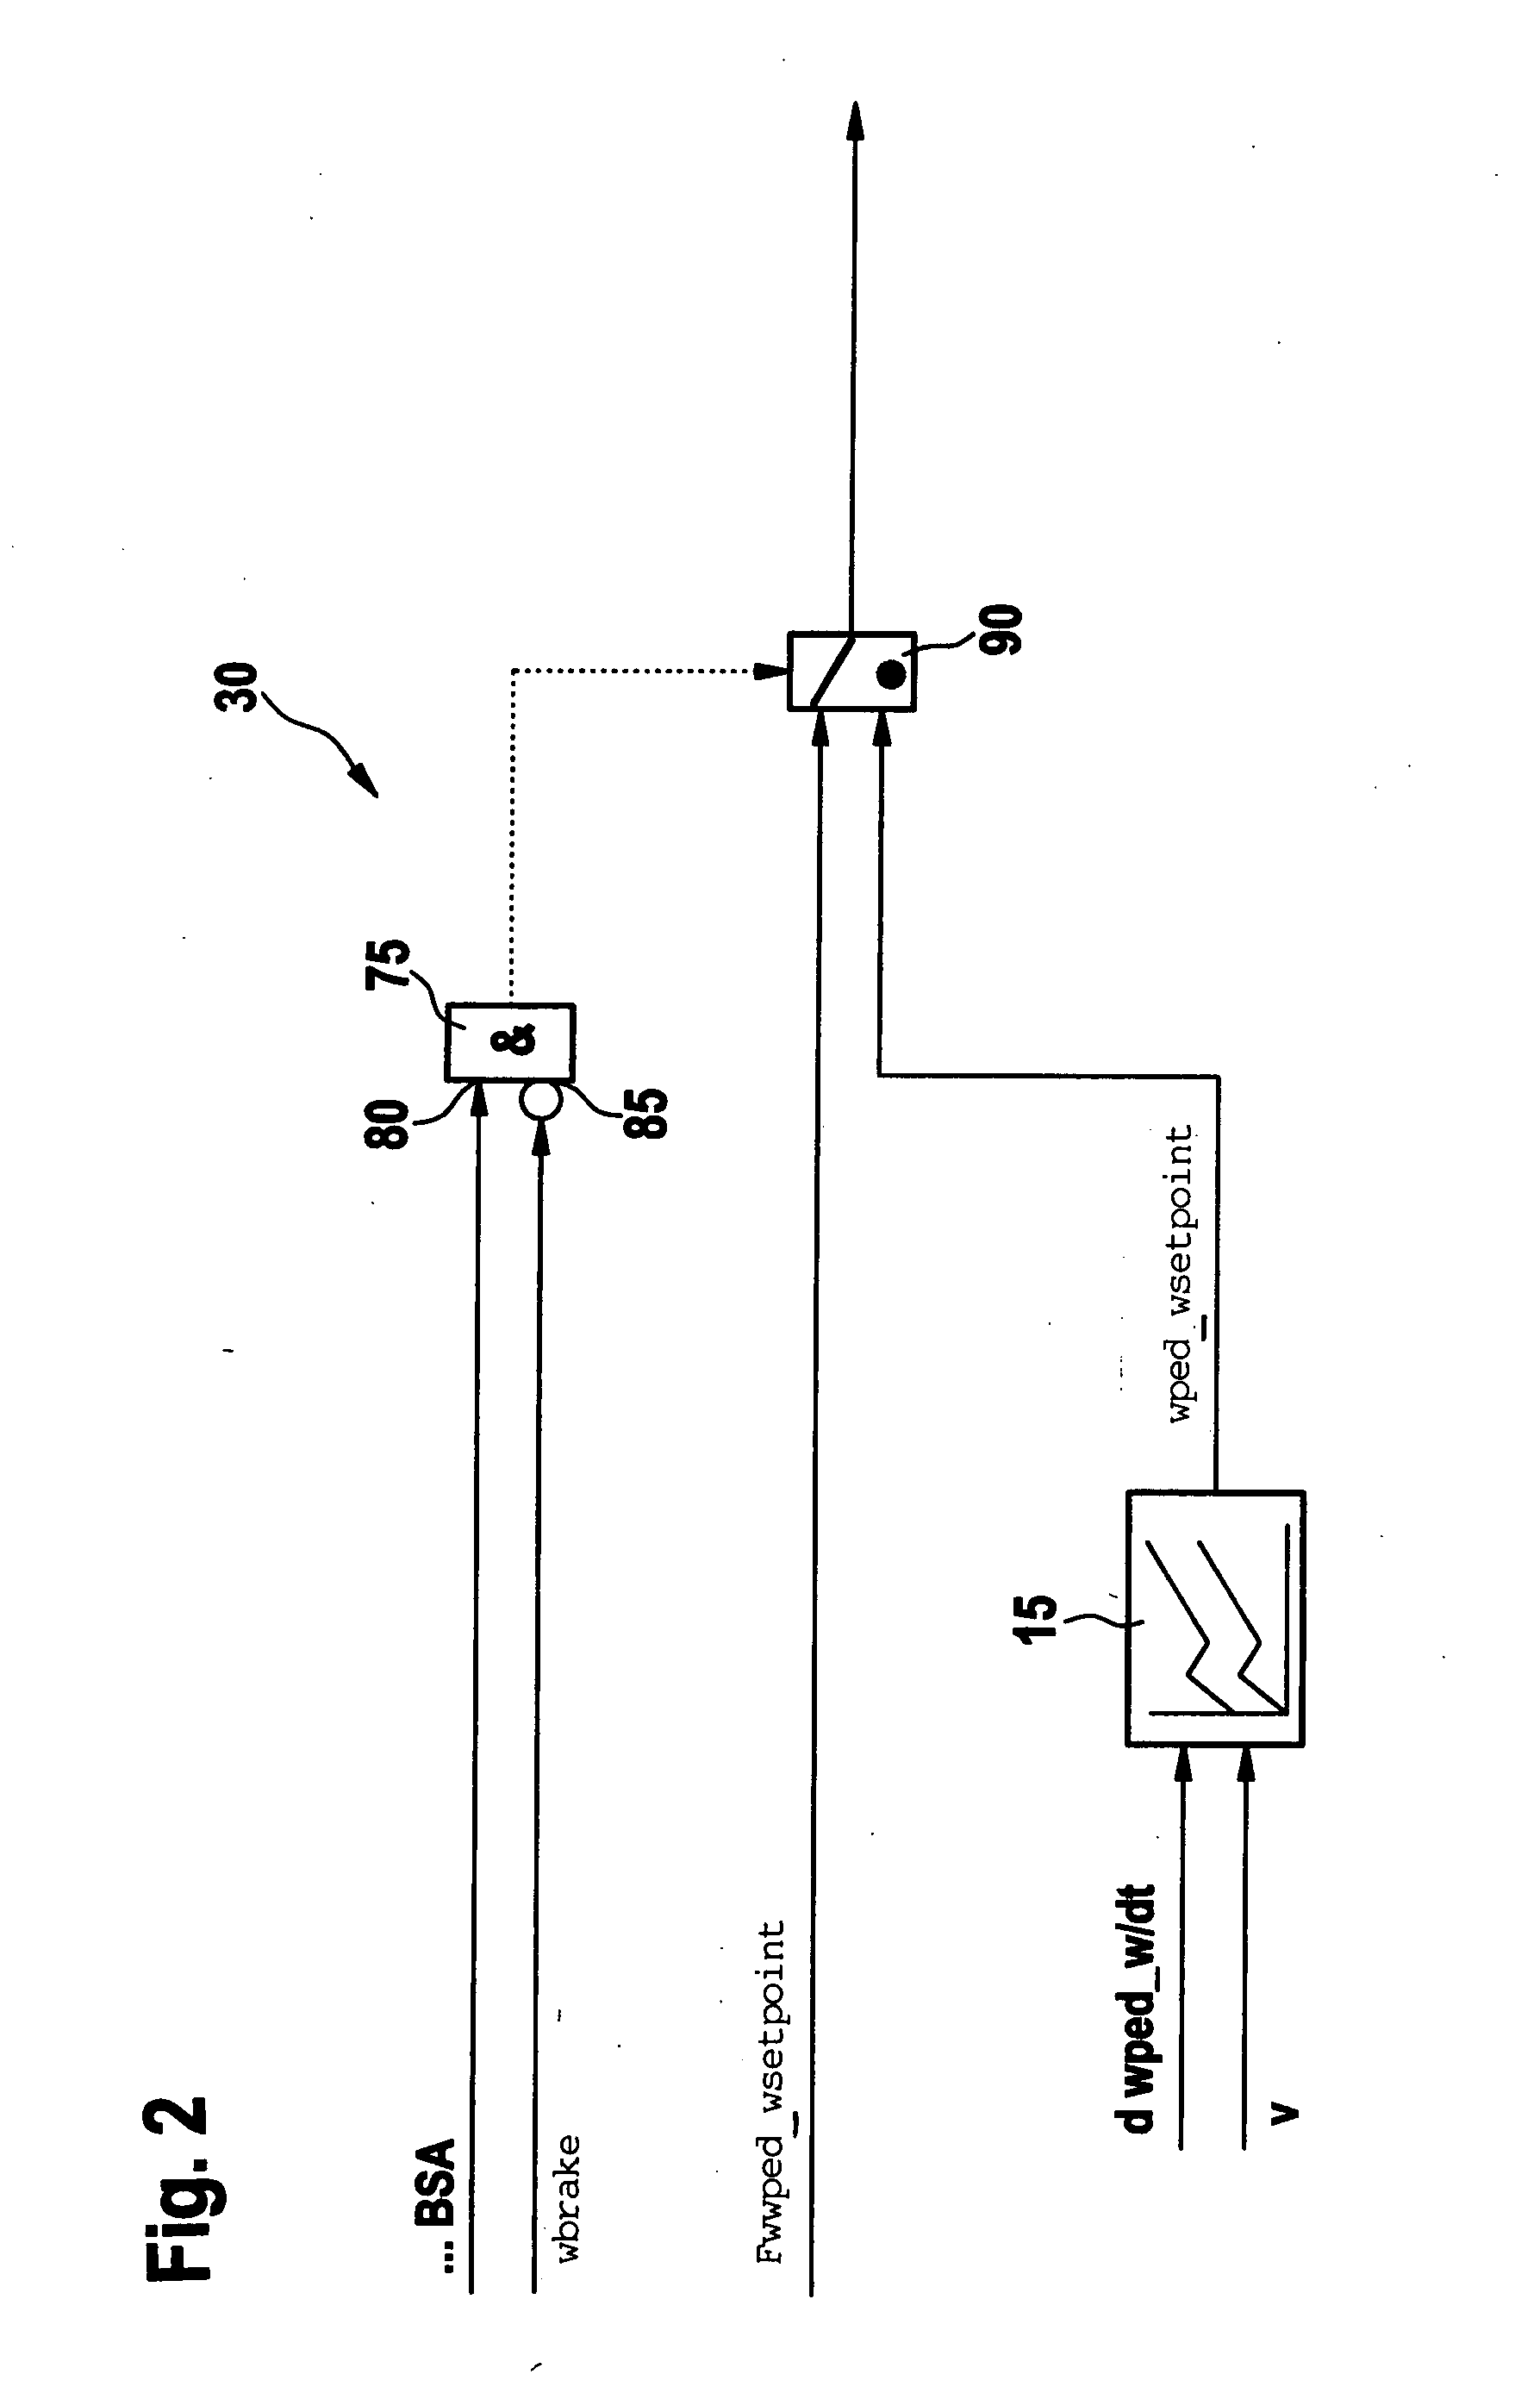 Method and device for operating a vehicle having an internal combustion engine